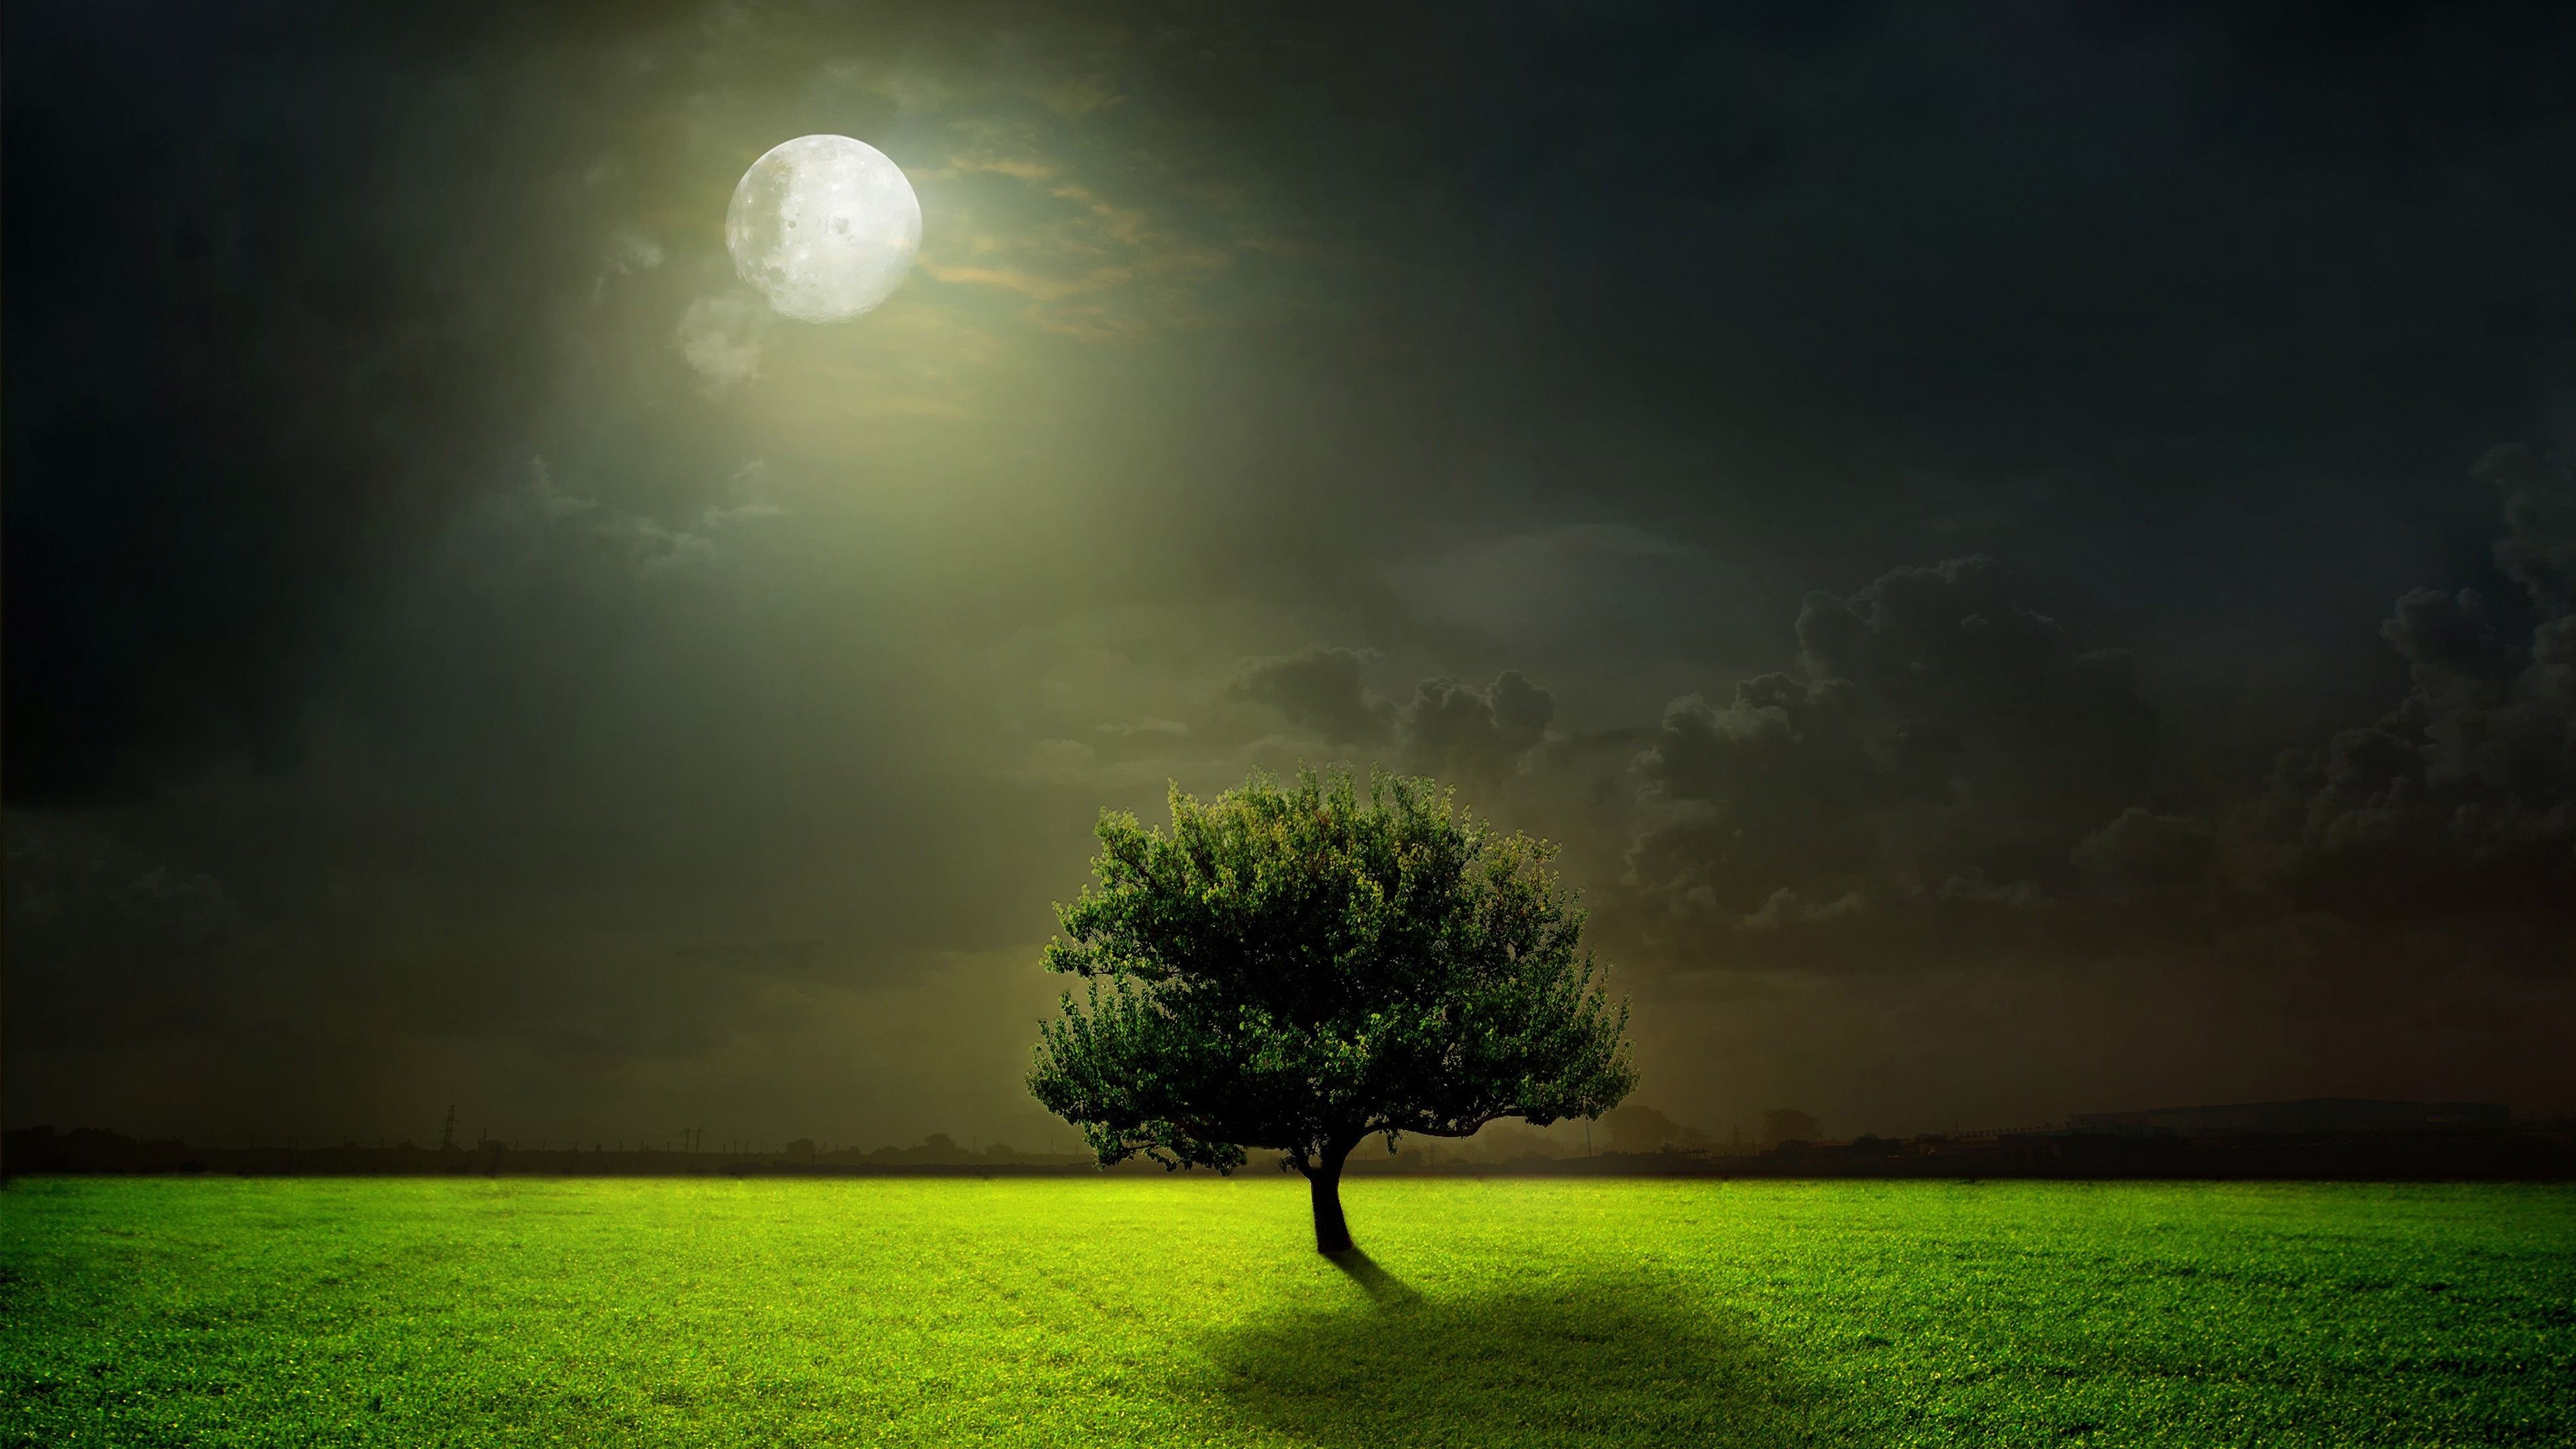 Meadows Night Tree with Full Moon 4K Wallpaper Download